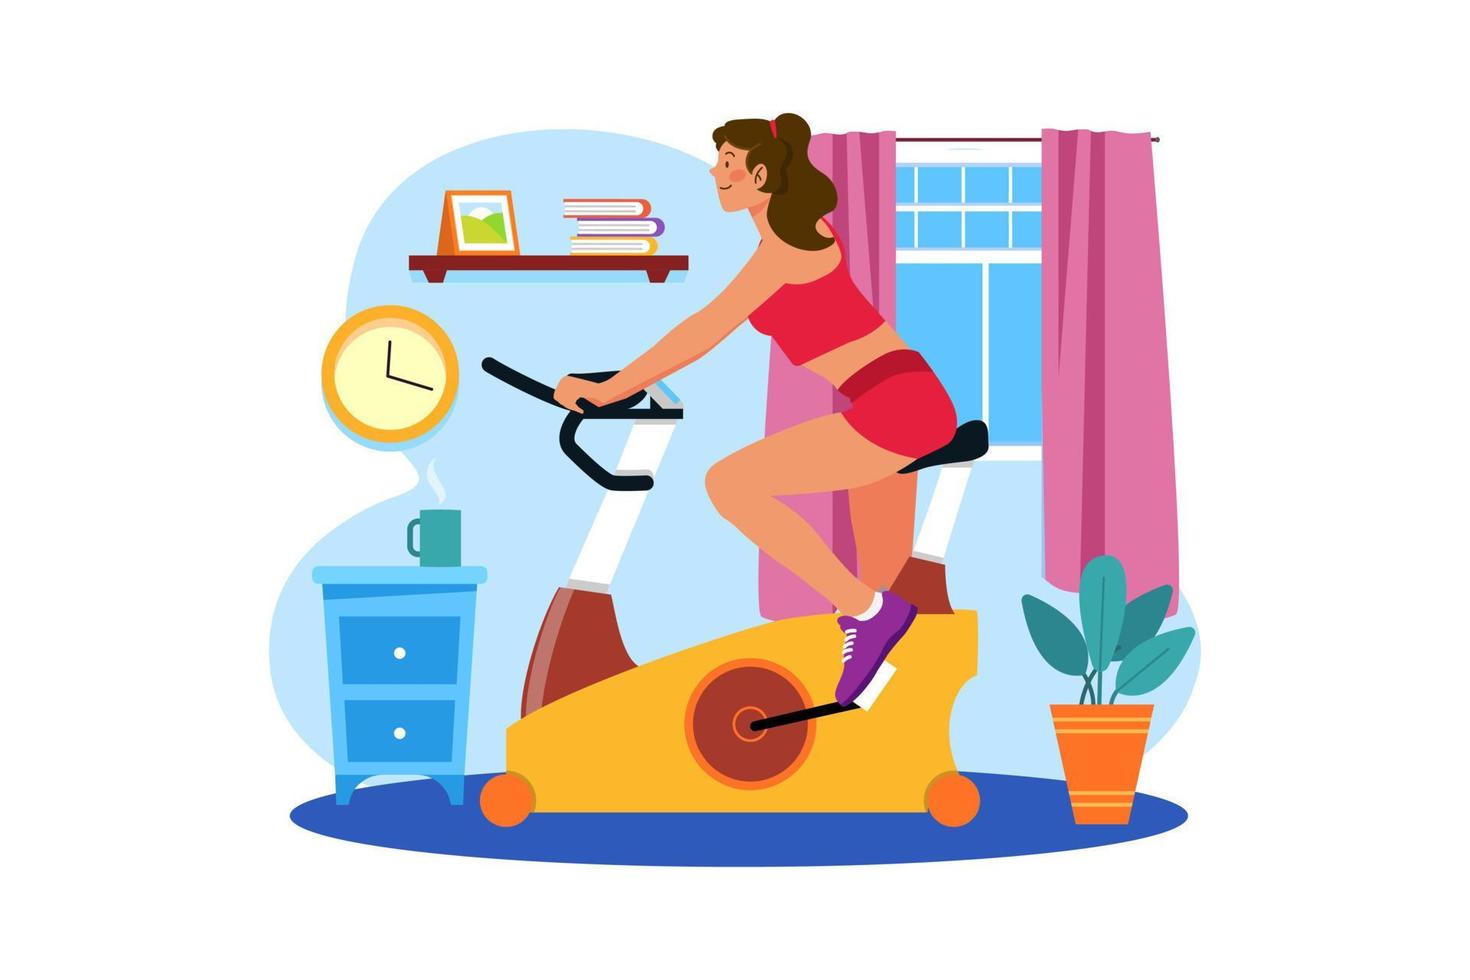 Stationary bicycle and indoor cycling Illustration concept on white background vector